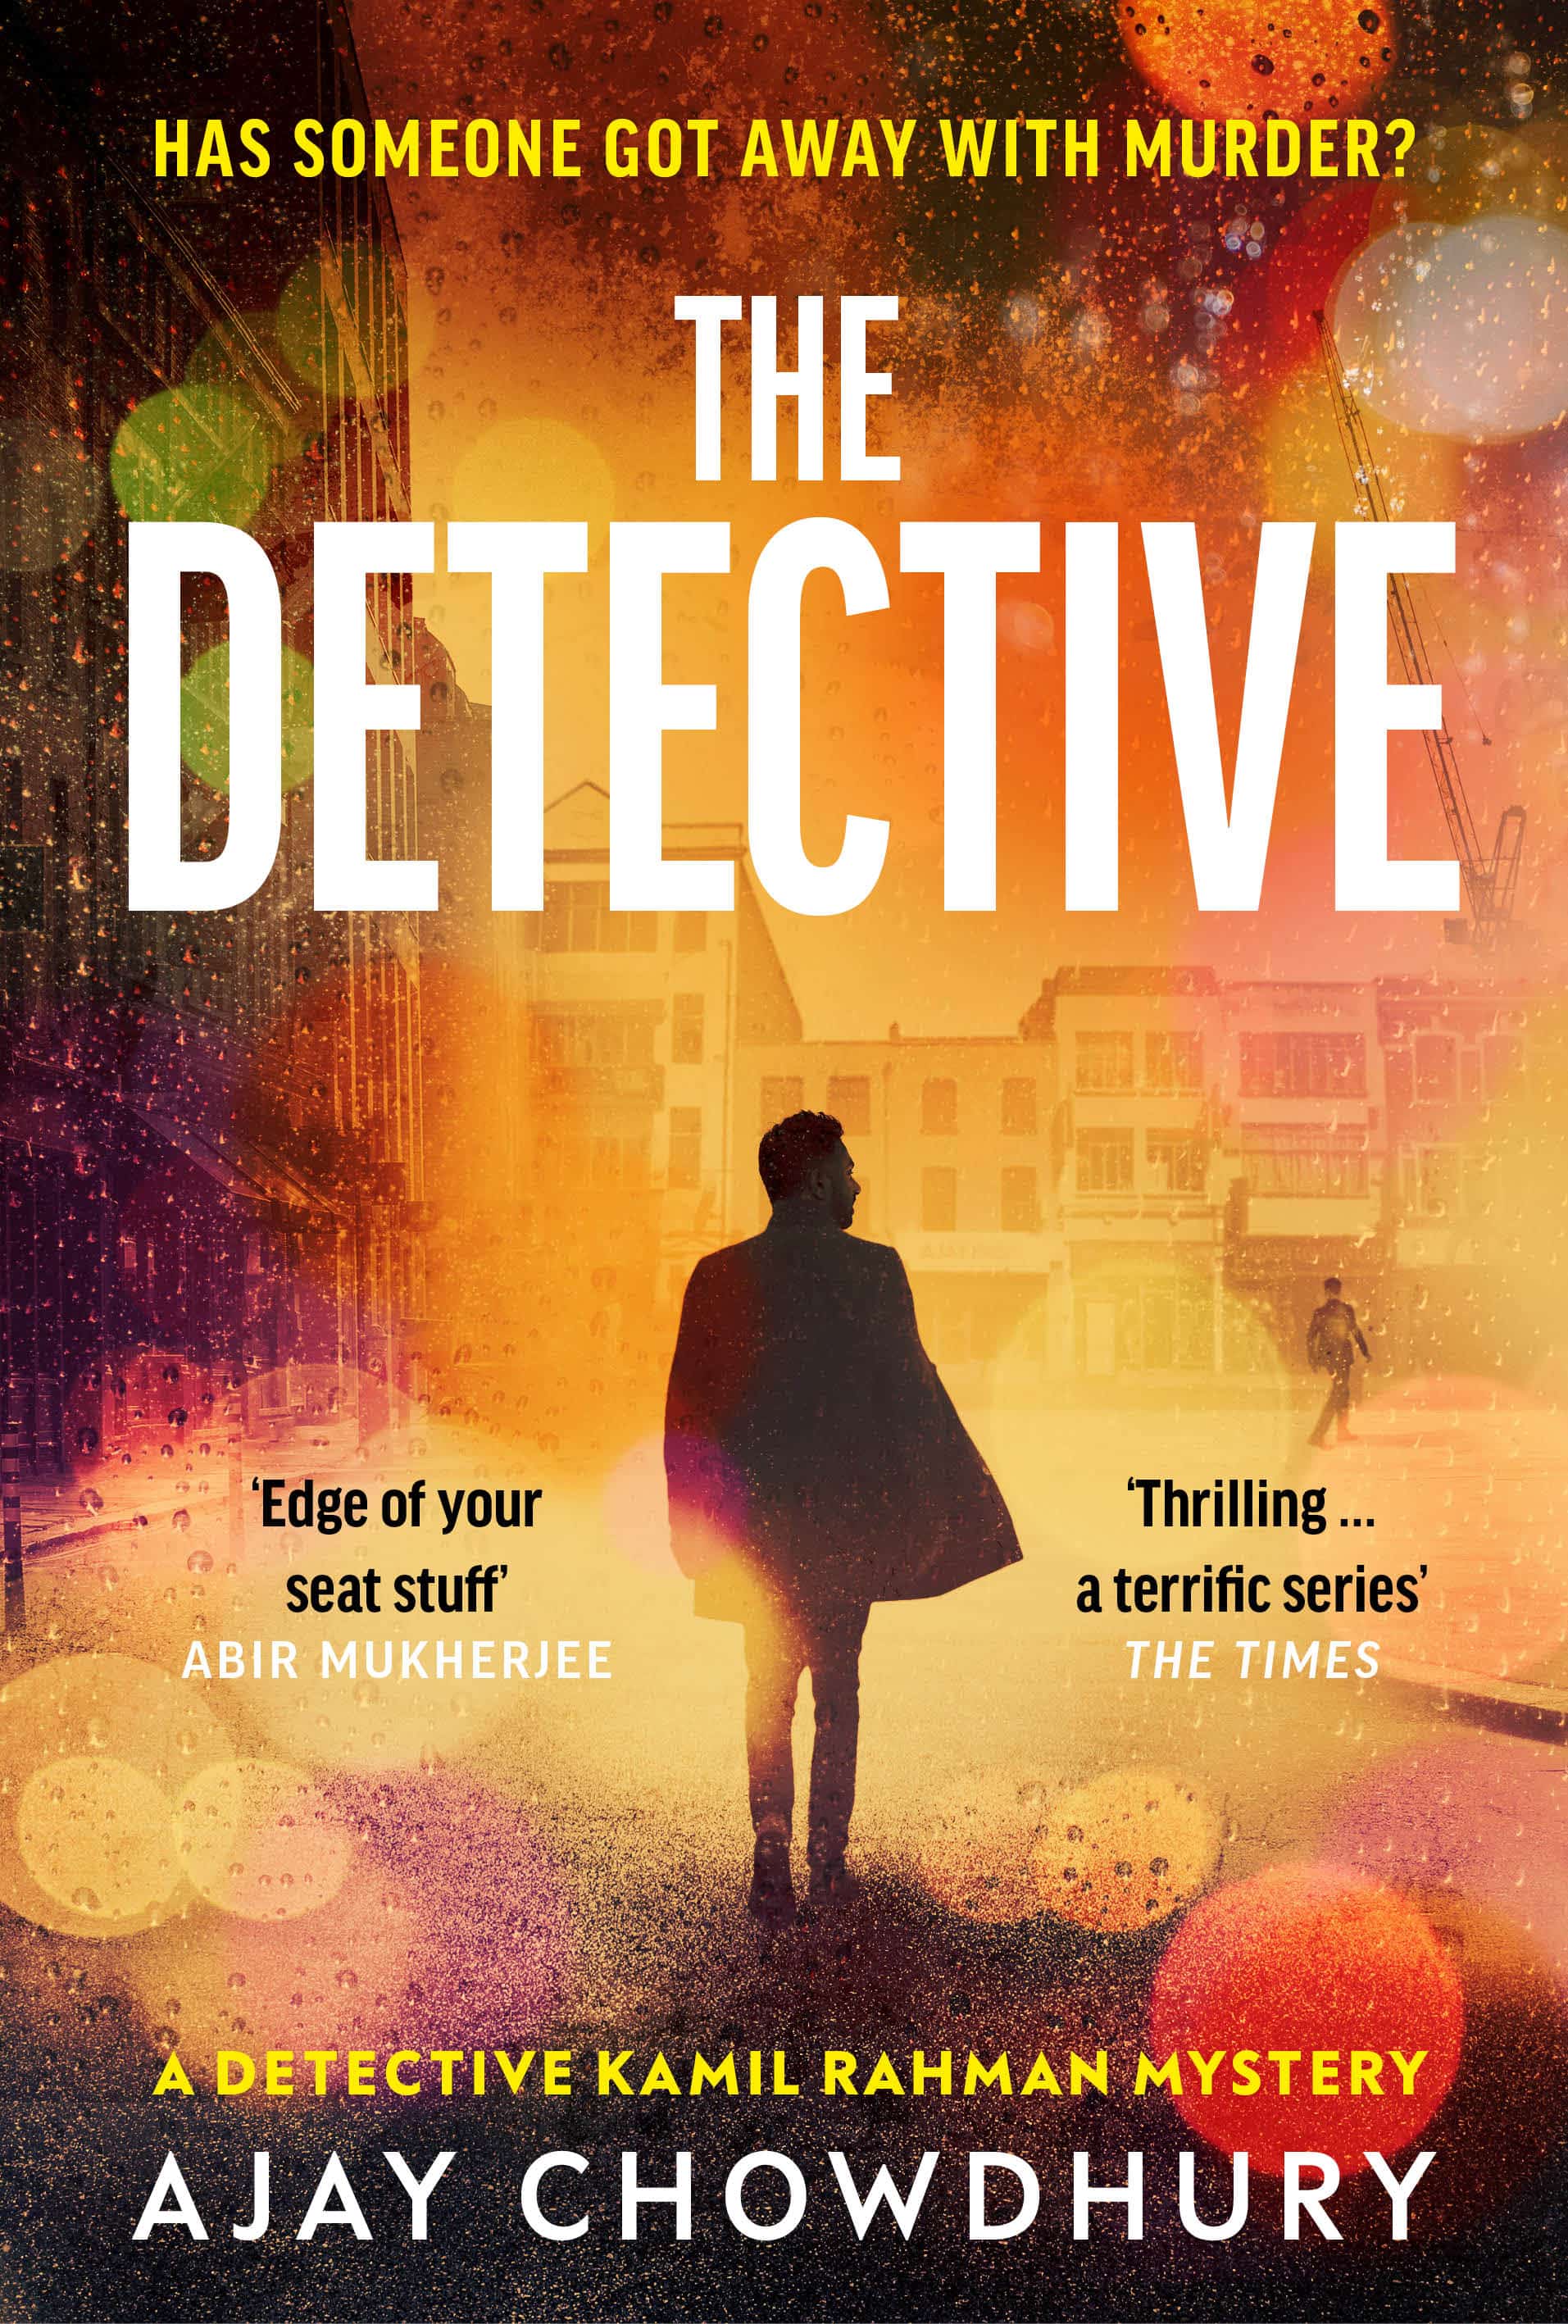 Book jacket of The Detective by Ajay Chowdhury